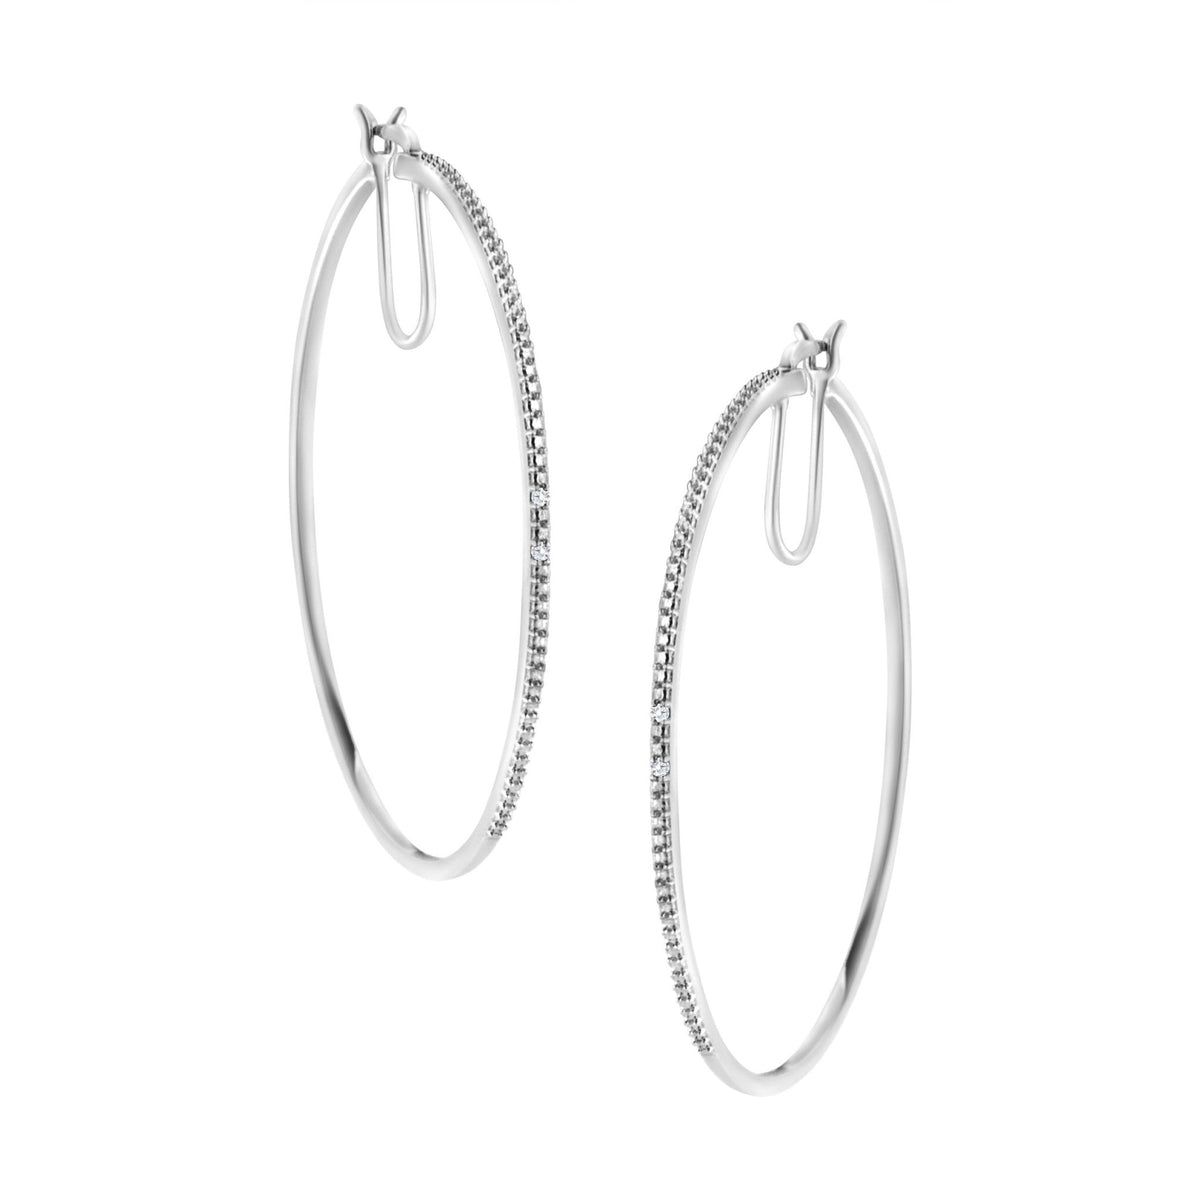 .925 Sterling Silver Diamond Accent Medium Sized Hoops Earrings (I-J Color, I2-I3 Clarity) - LinkagejewelrydesignLinkagejewelrydesign